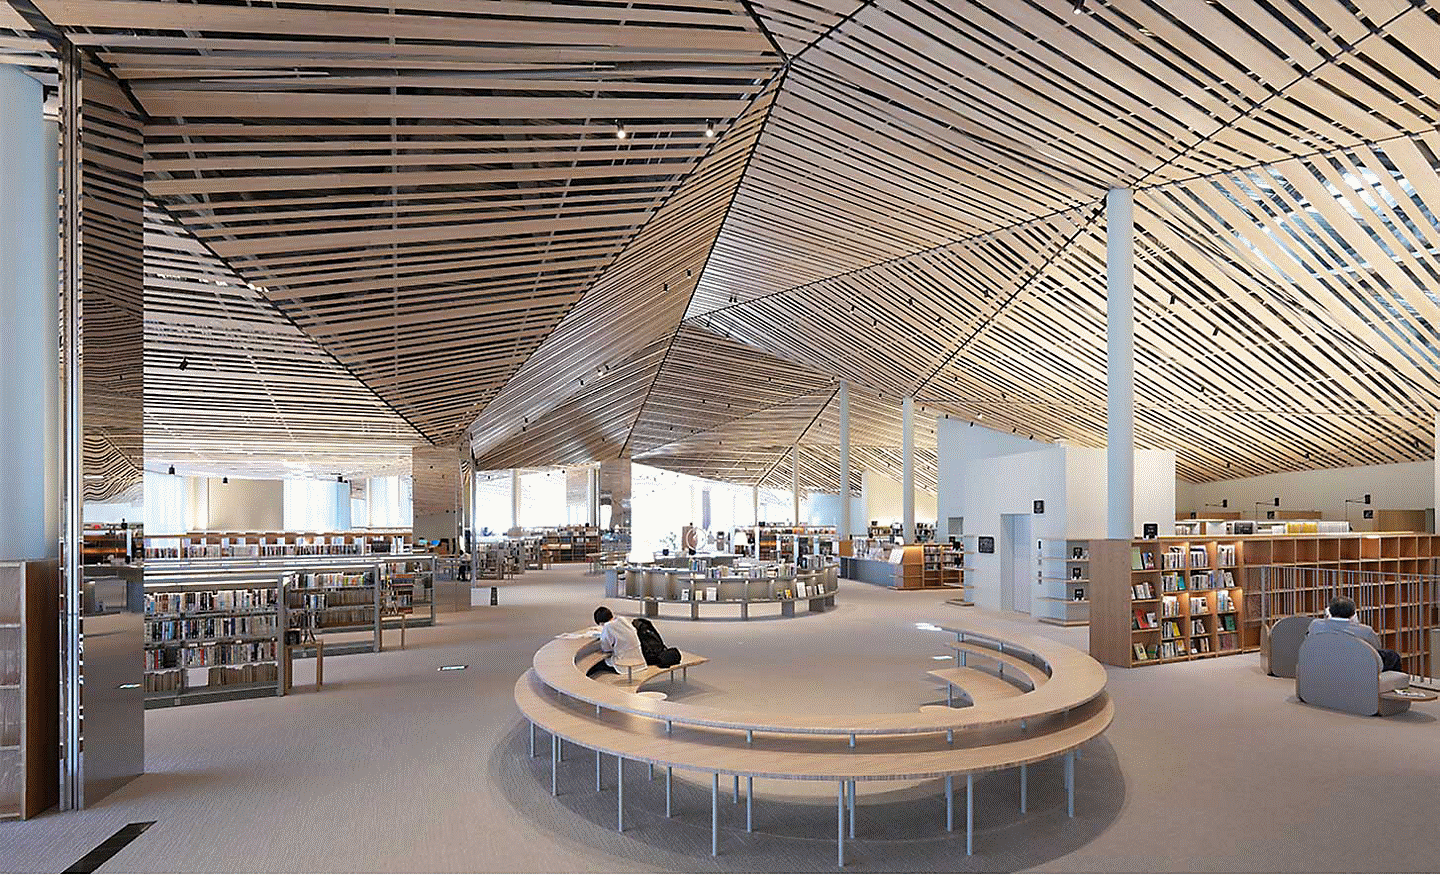 Image of the interior space of a large library with an elaborate design using many straight wood planks on the ceiling, with resolution to every corner of the screen